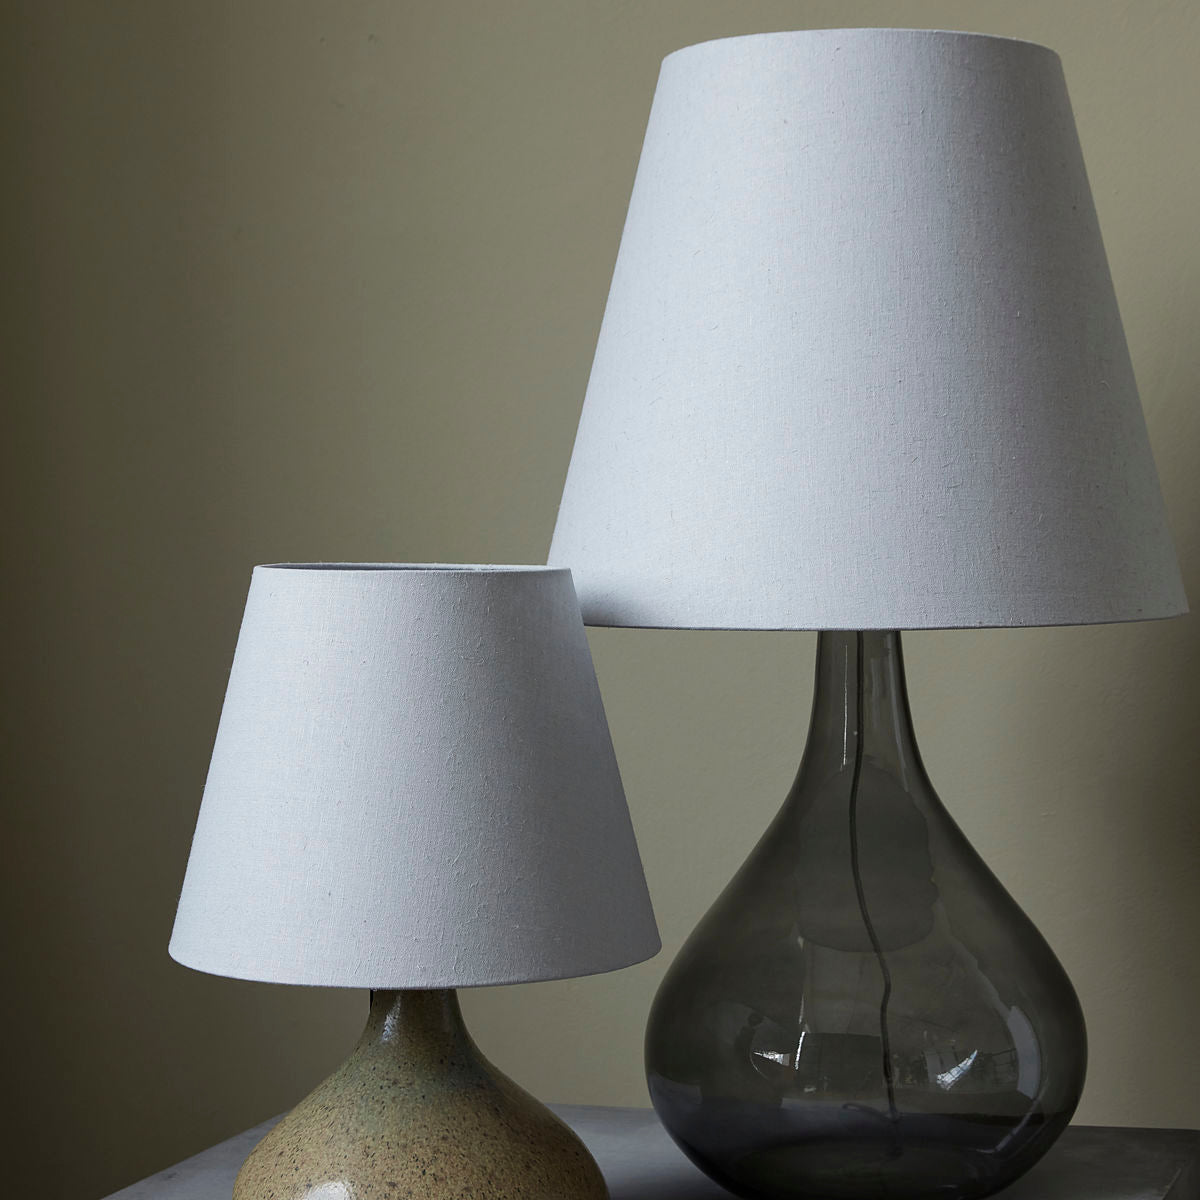 Lampshade, Illy, Grey House Doctor